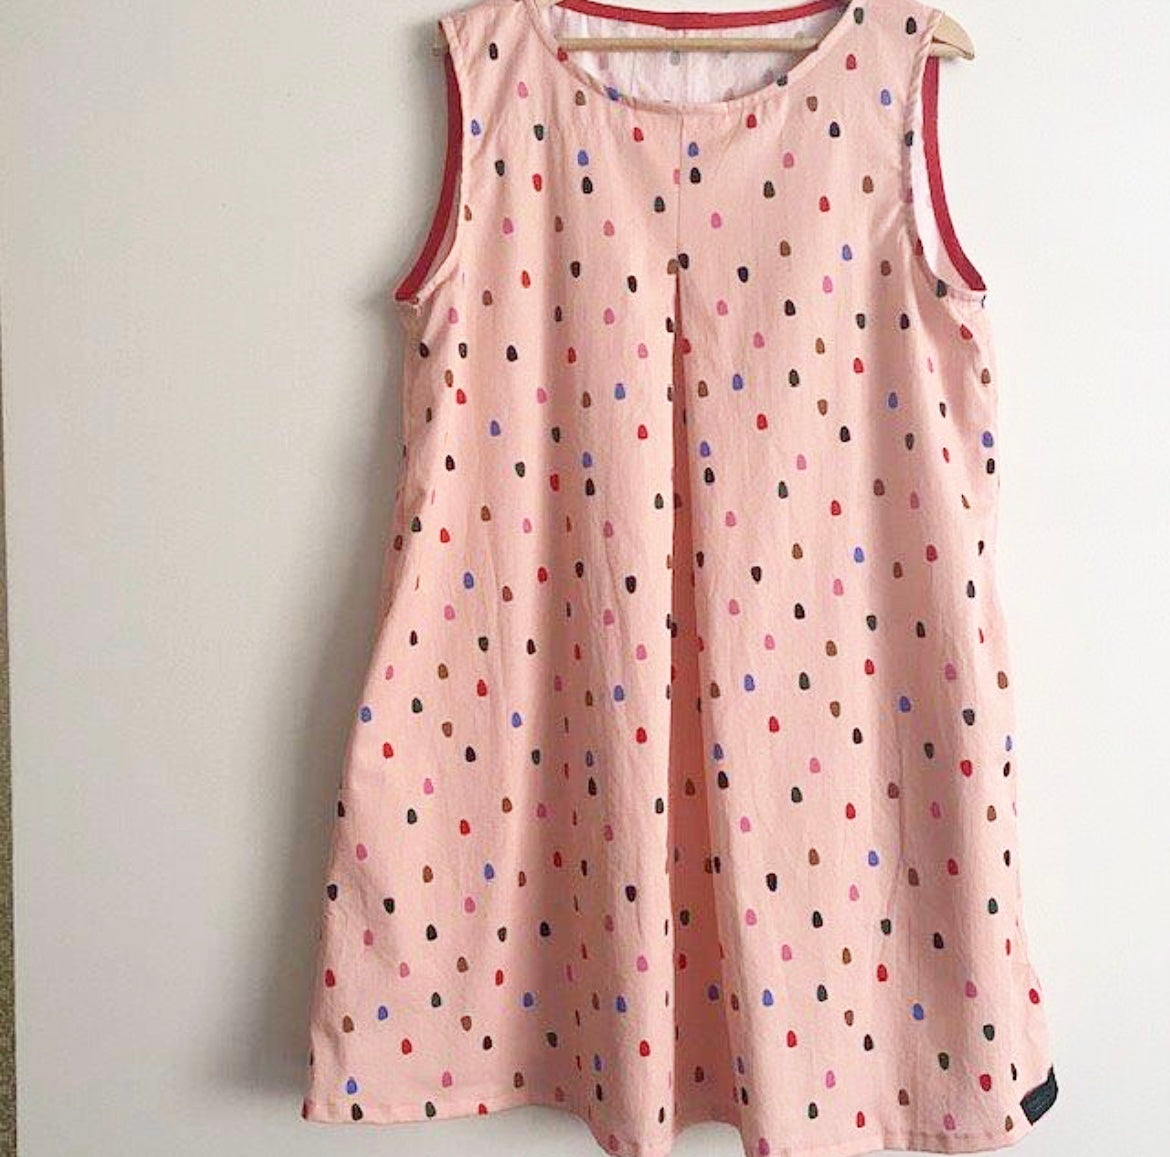 Sample Shift Dress - Peach Drops with pockets (M)